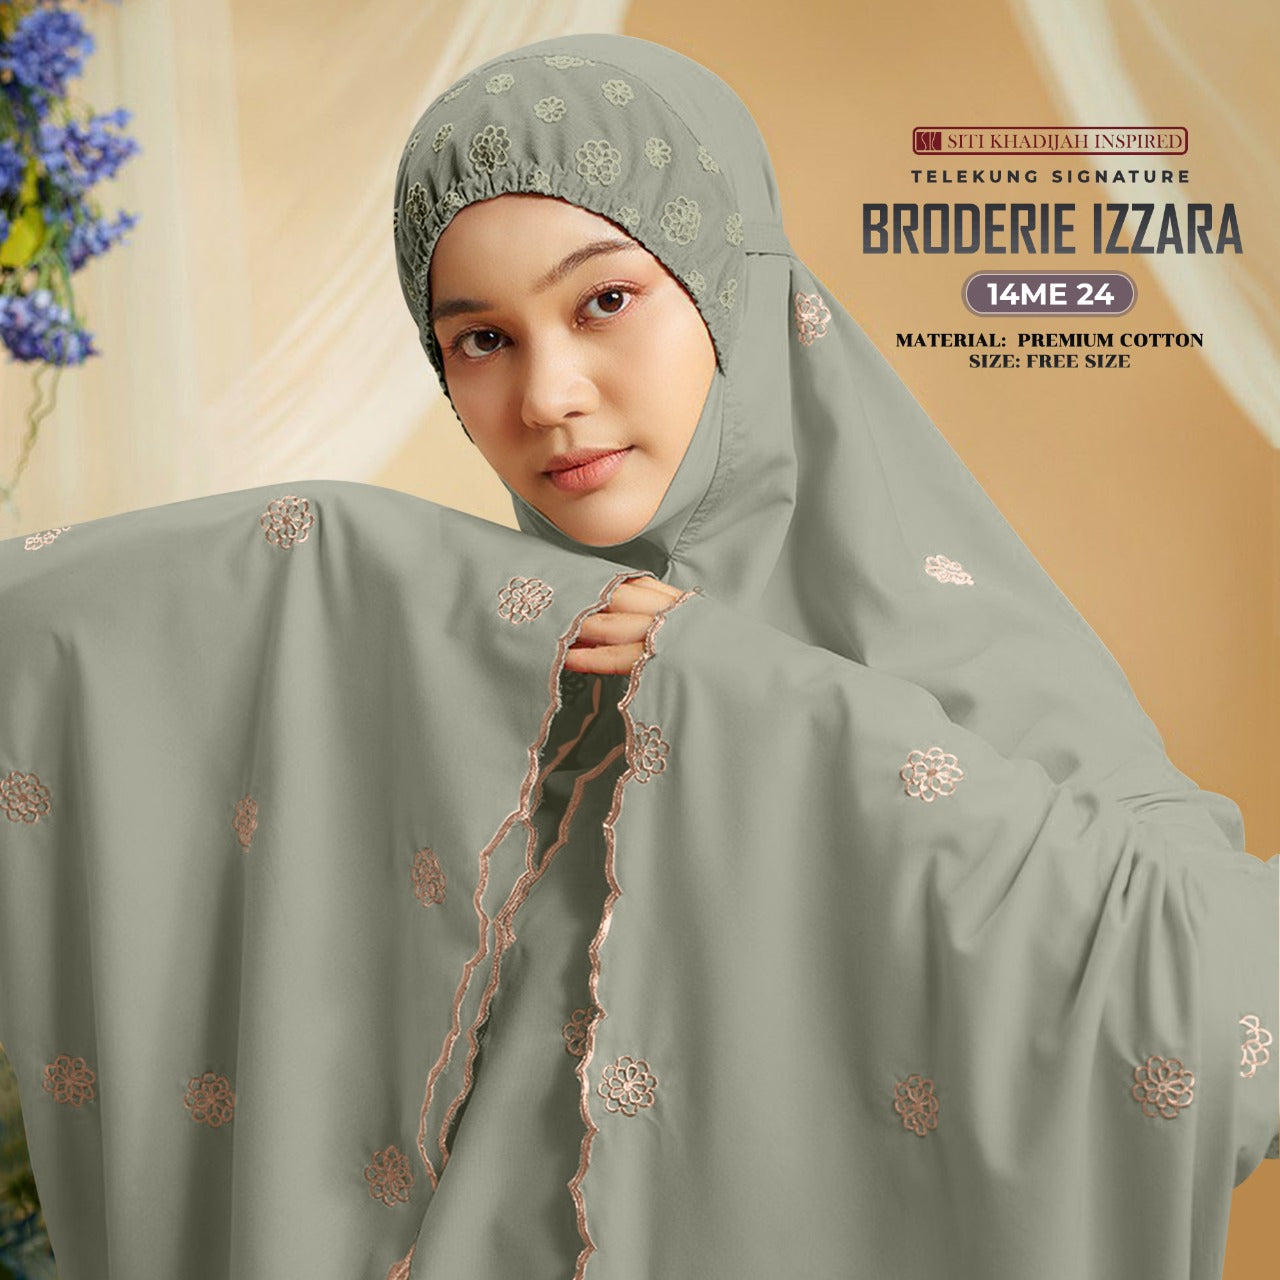 Telekung SK Broderie Izzara Collection Free Woven bag